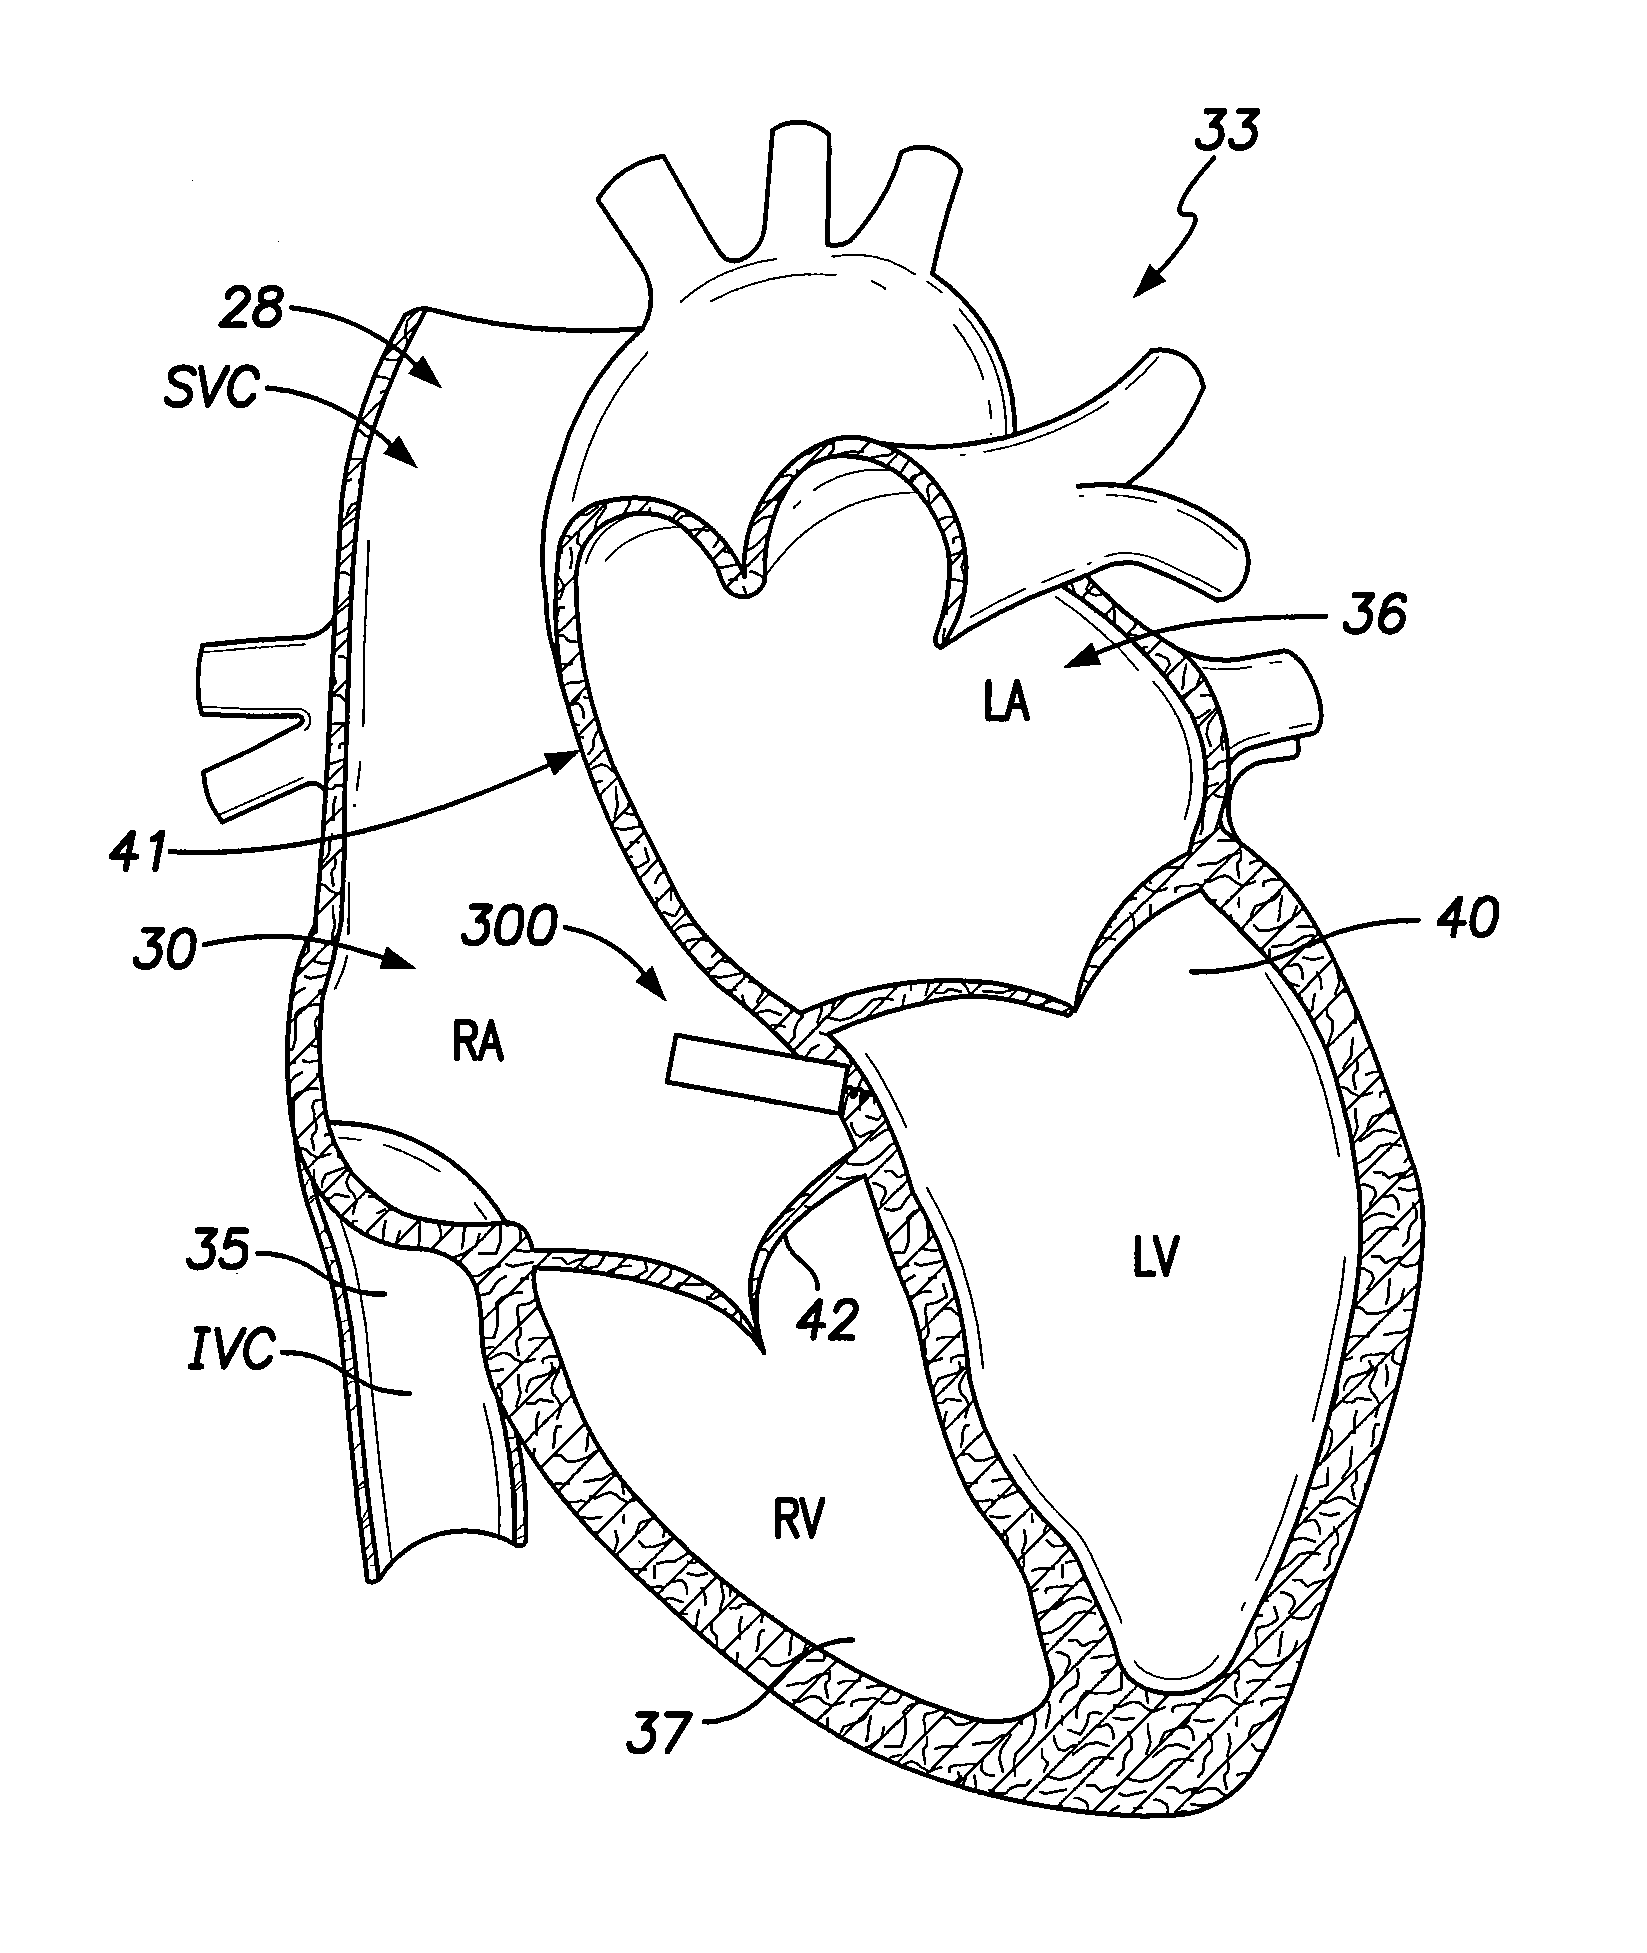 Single-chamber leadless intra-cardiac medical device with dual-chamber functionality and shaped stabilization intra-cardiac extension